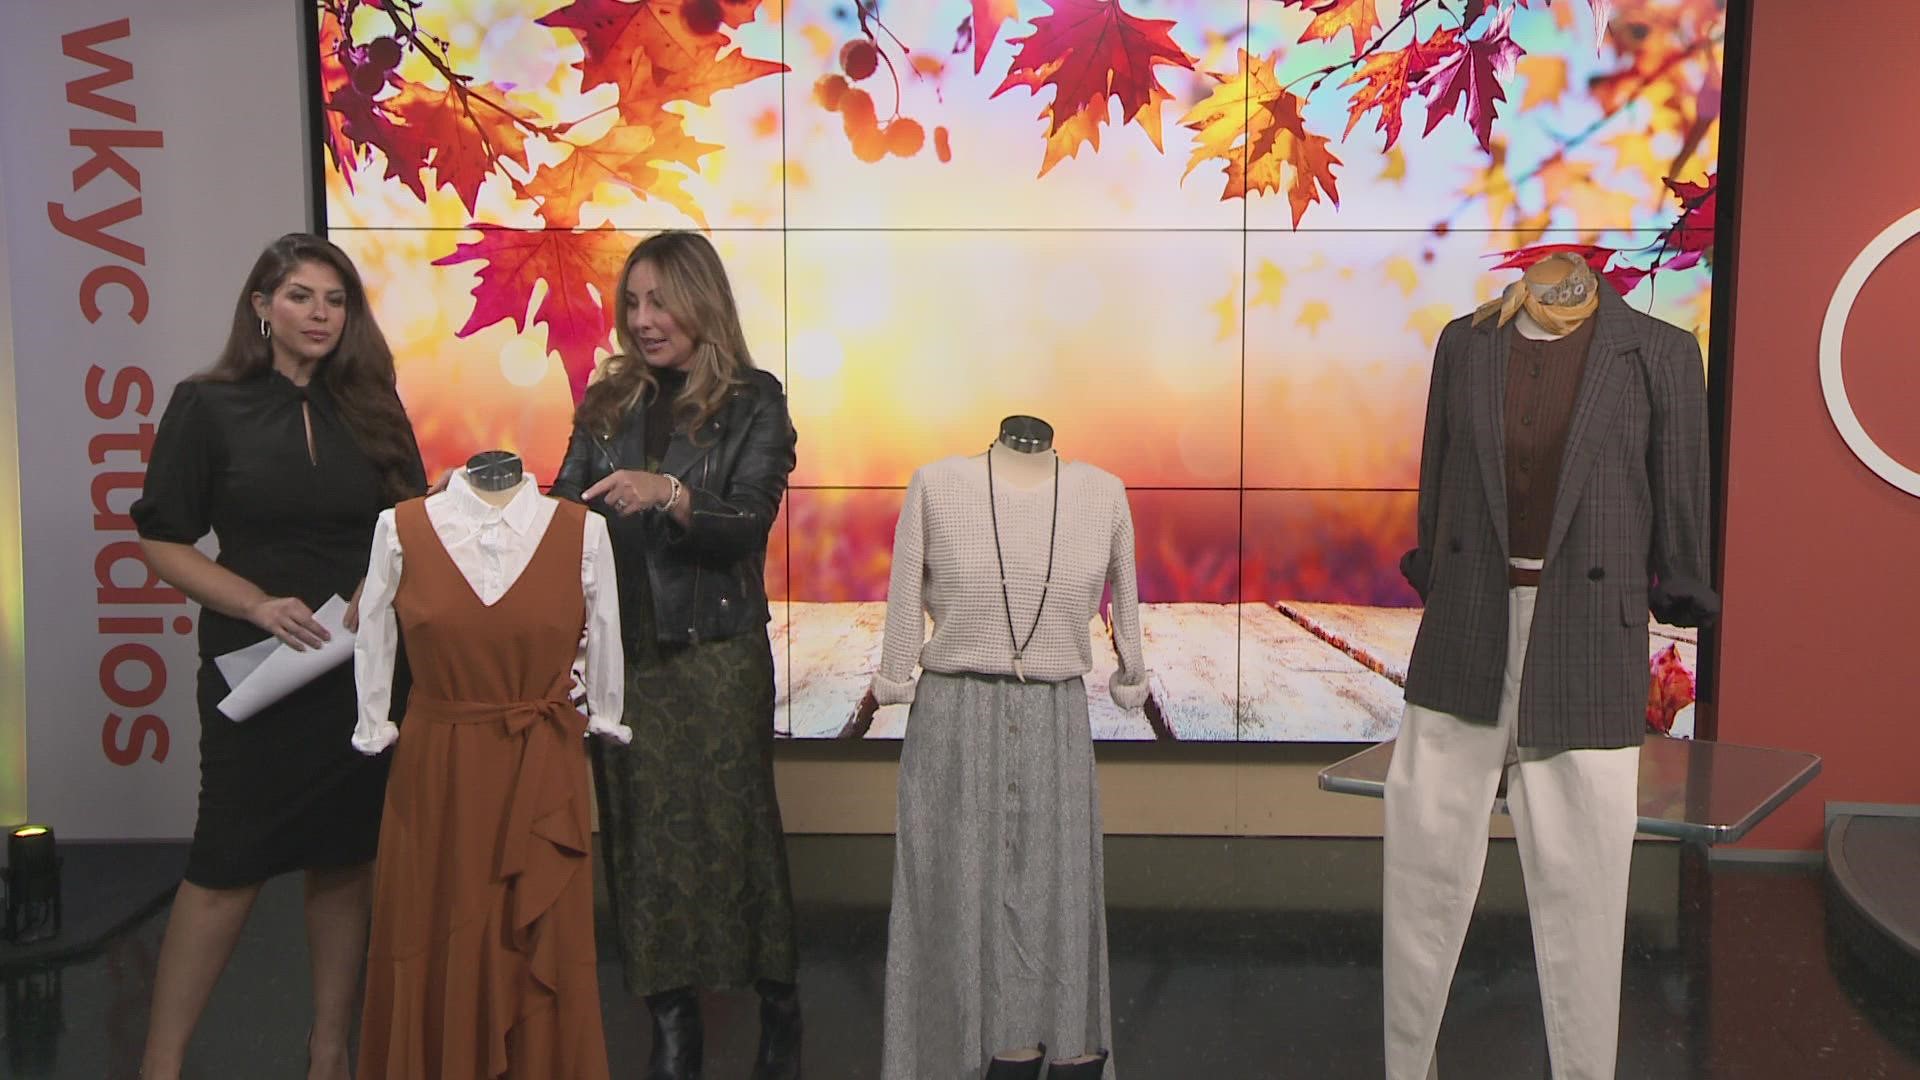 3News Style Contributor Hallie Abrams stops by "Front Row" with some easy tips to help transition your seasonal style and "fallify" your look